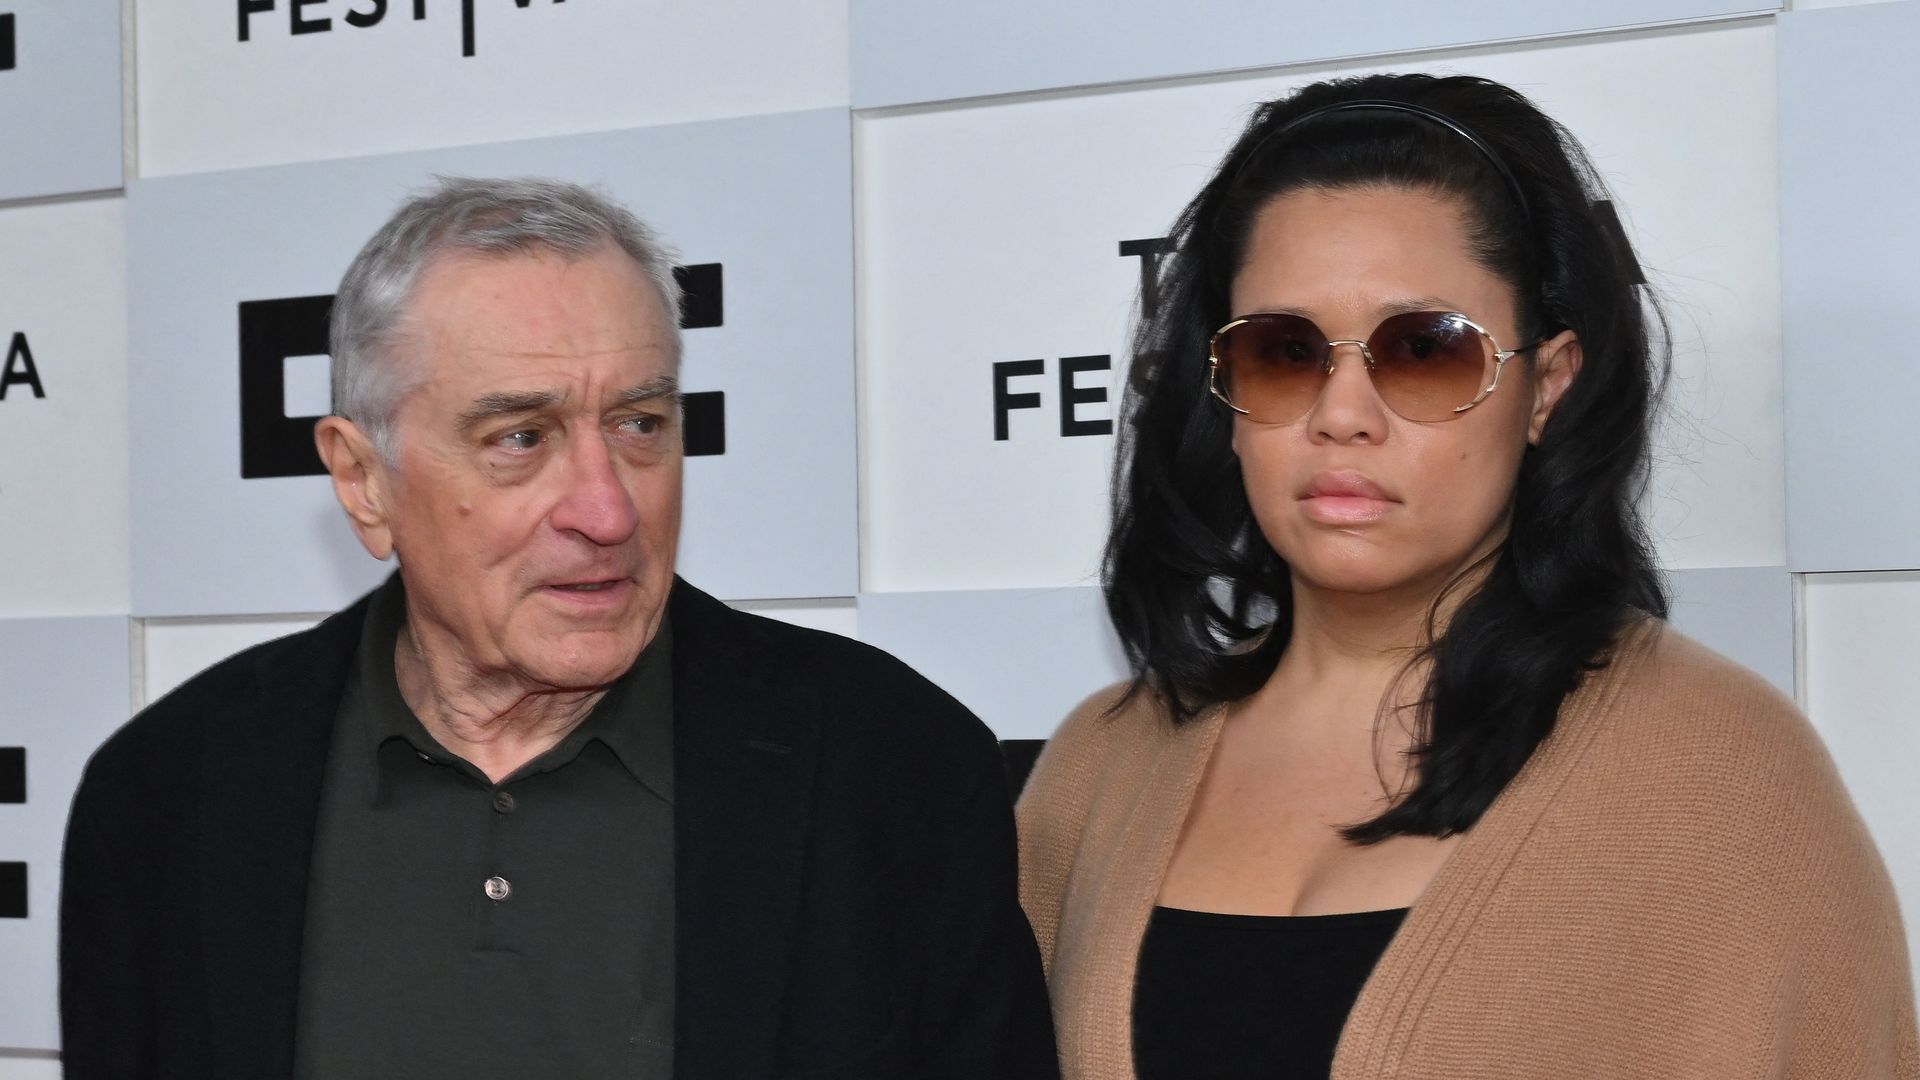 Robert De Niro and his girlfriend Tiffany Chen arrive to the screening of "Kiss the Future" during the opening night of the Tribeca Film Festival at OKX Theater in New York City on June 7, 2023